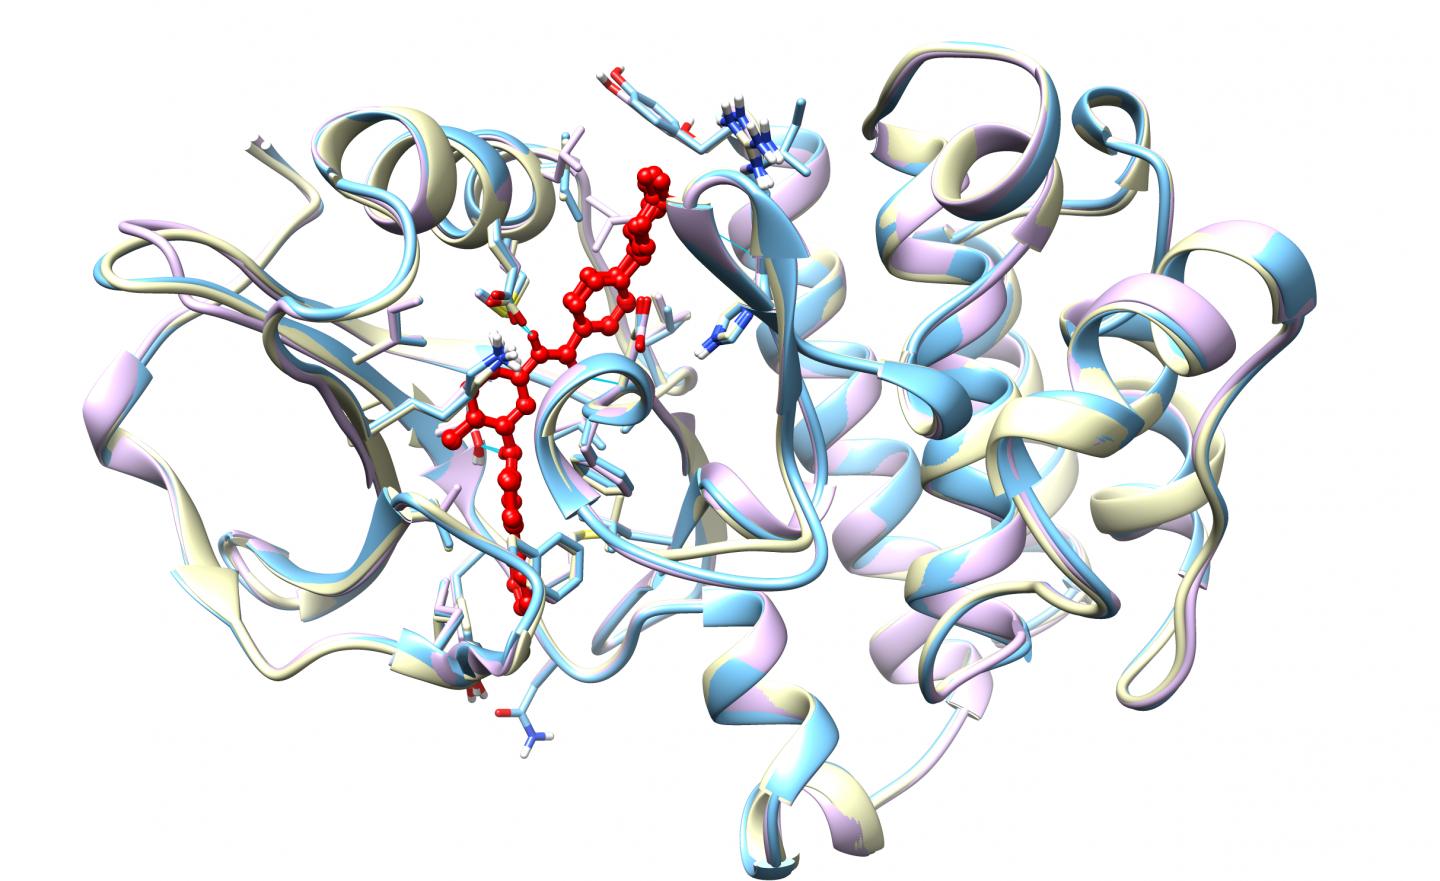 Masitinib (Colored in Red) Binds and Inhibits the Activity